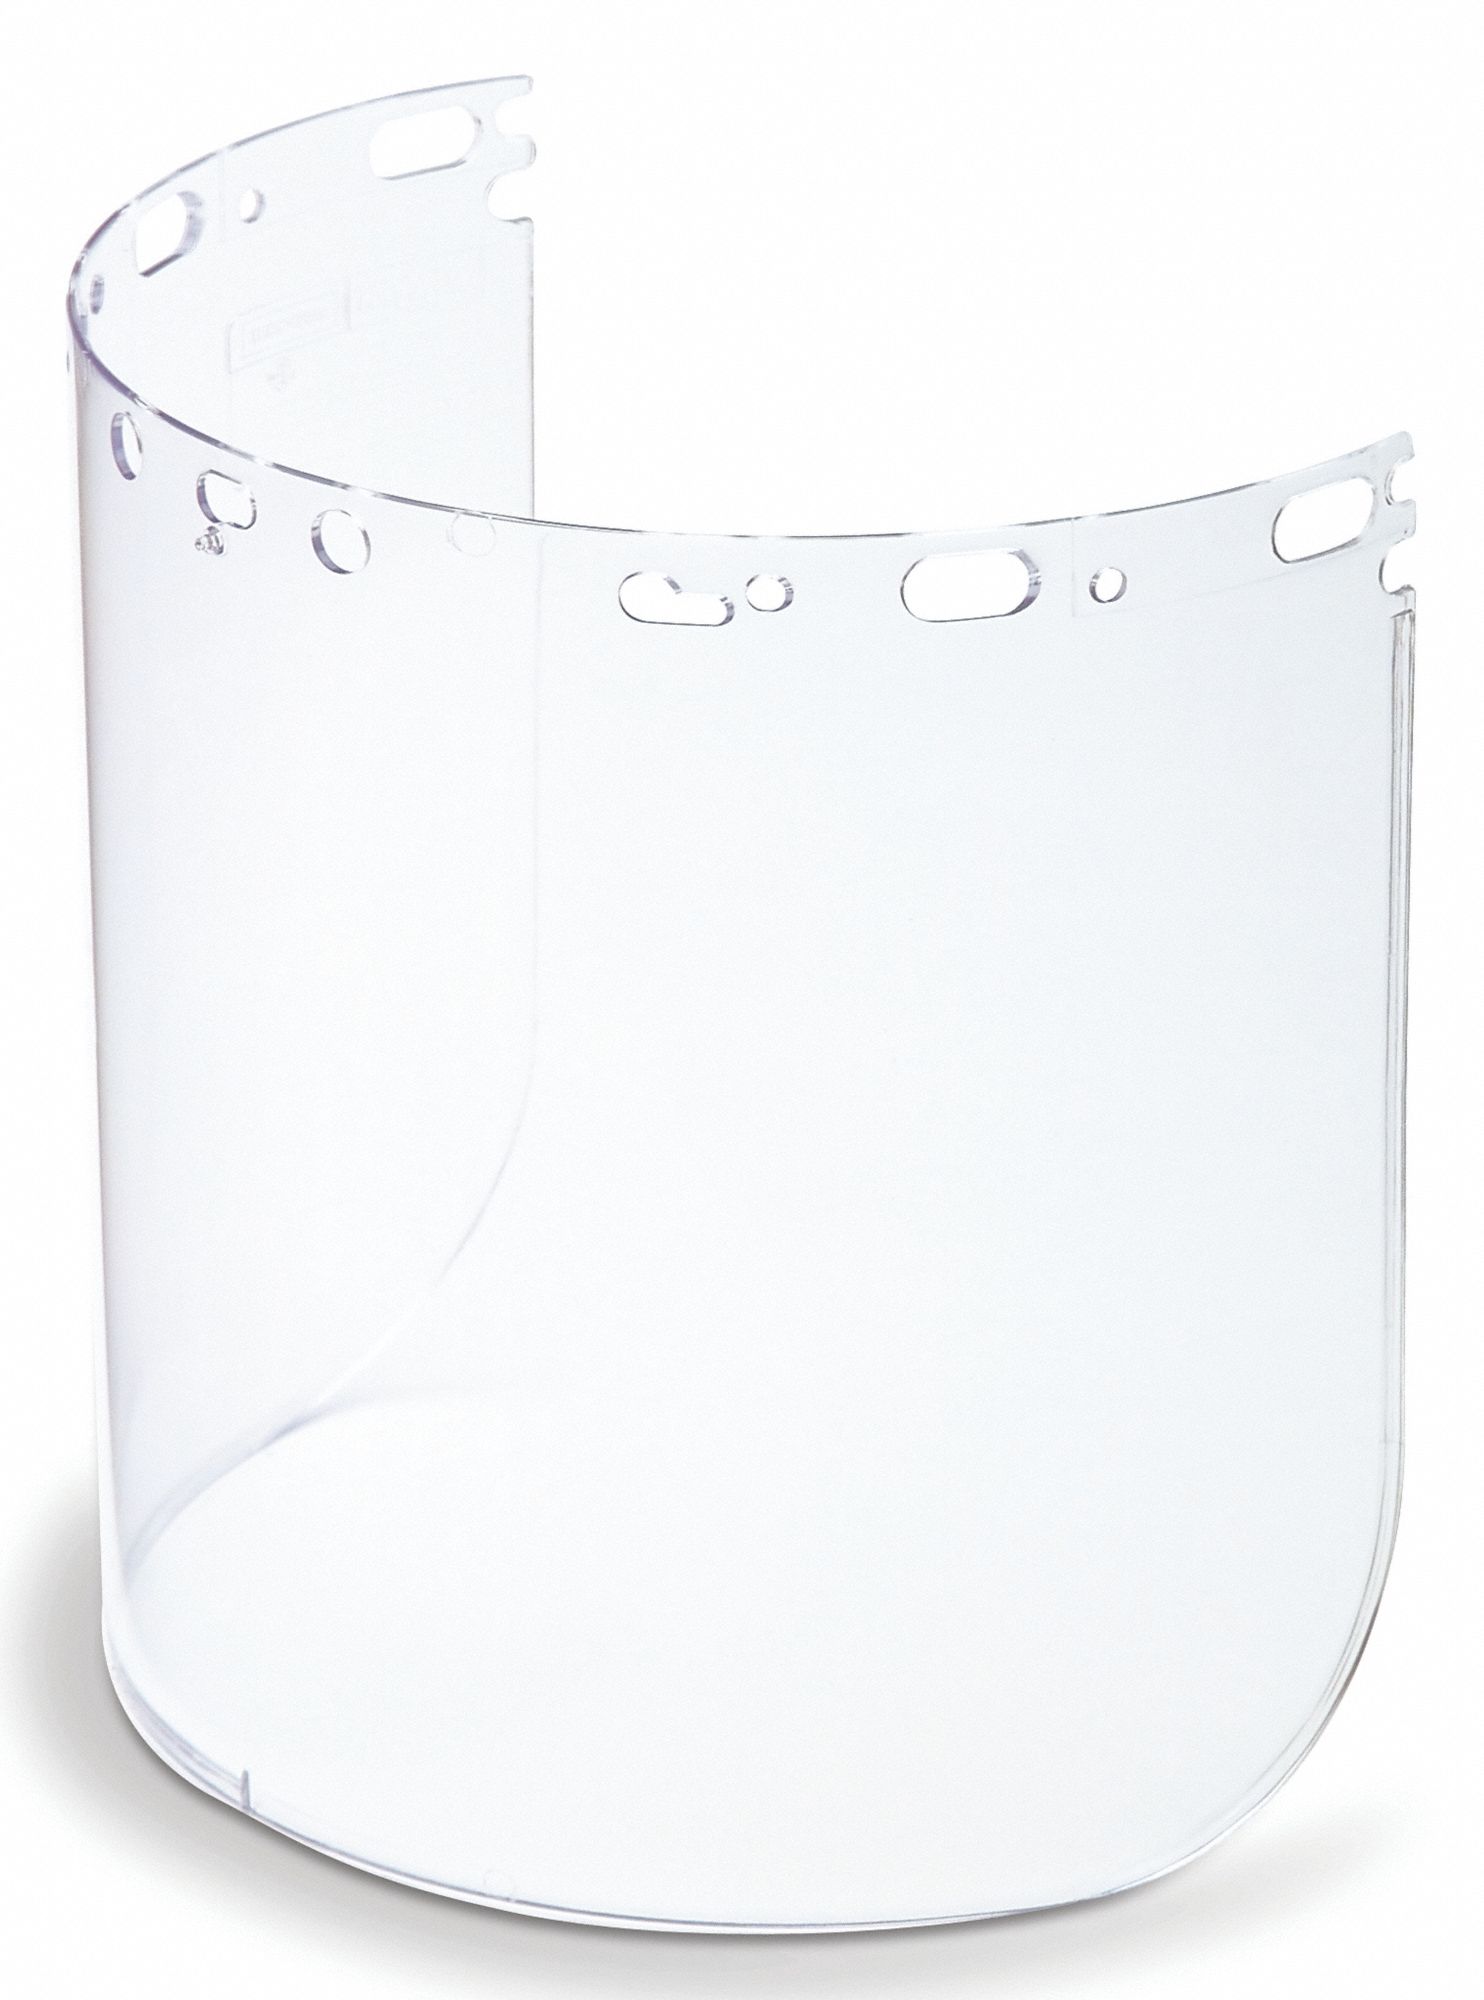 FACESHIELD VISOR REPLACEMENT, MOLDED, CLEAR, PROPIONATE/PC, CSA, 15X8½X0.07 IN